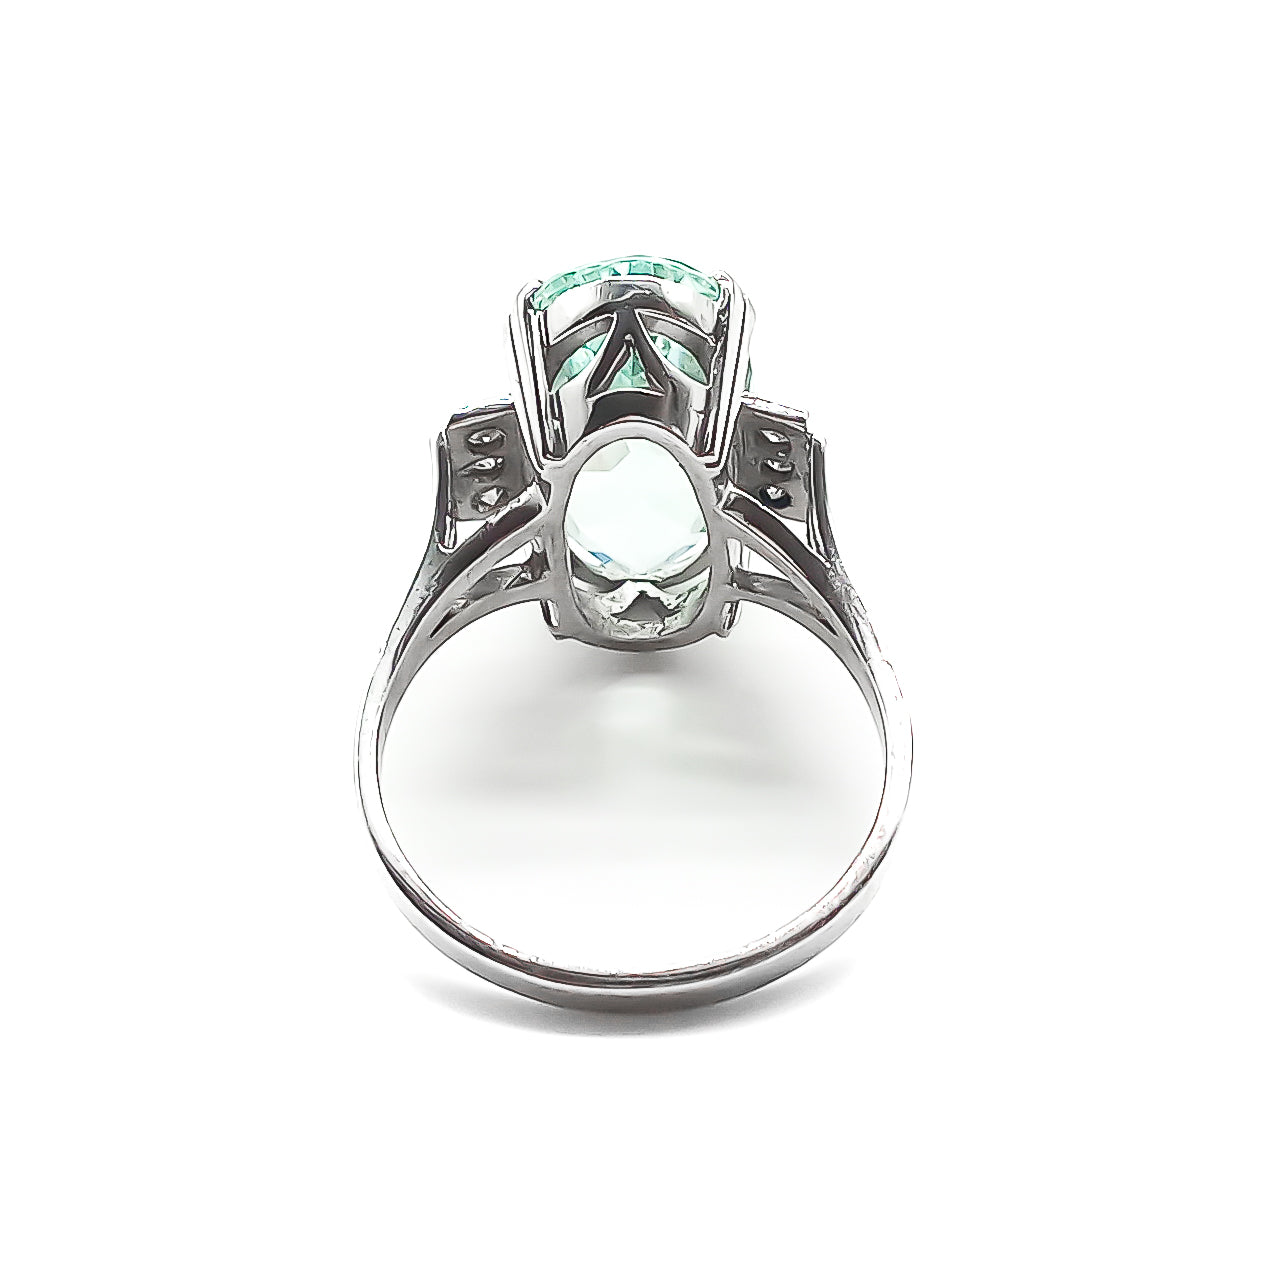 Magnificent 18ct white gold ring set with a beautifully faceted 7ct oval aquamarine and six small diamonds.